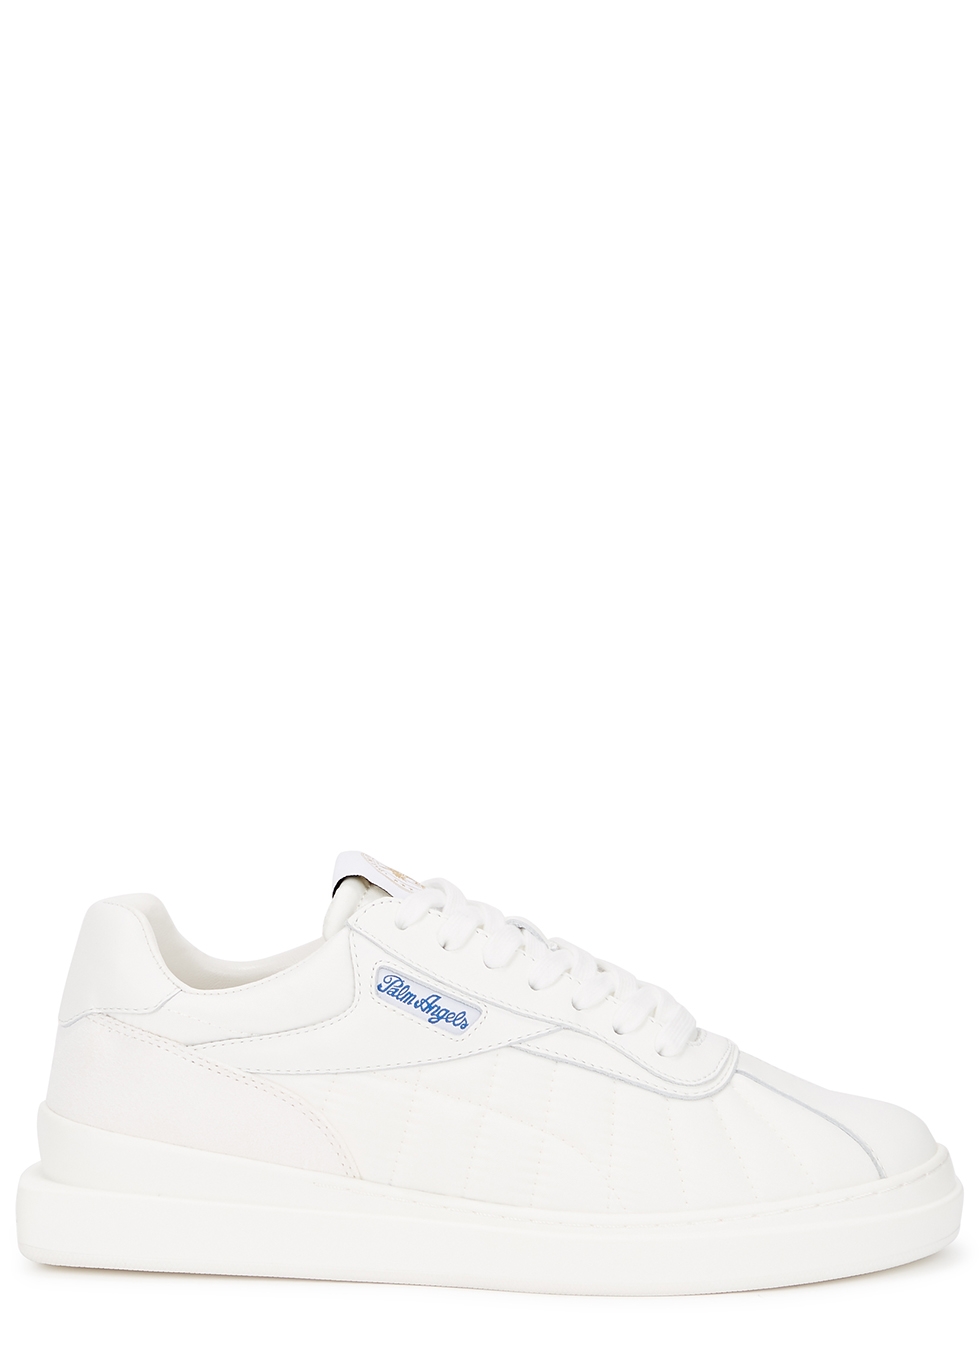 Rainbow white panelled leather sneakers